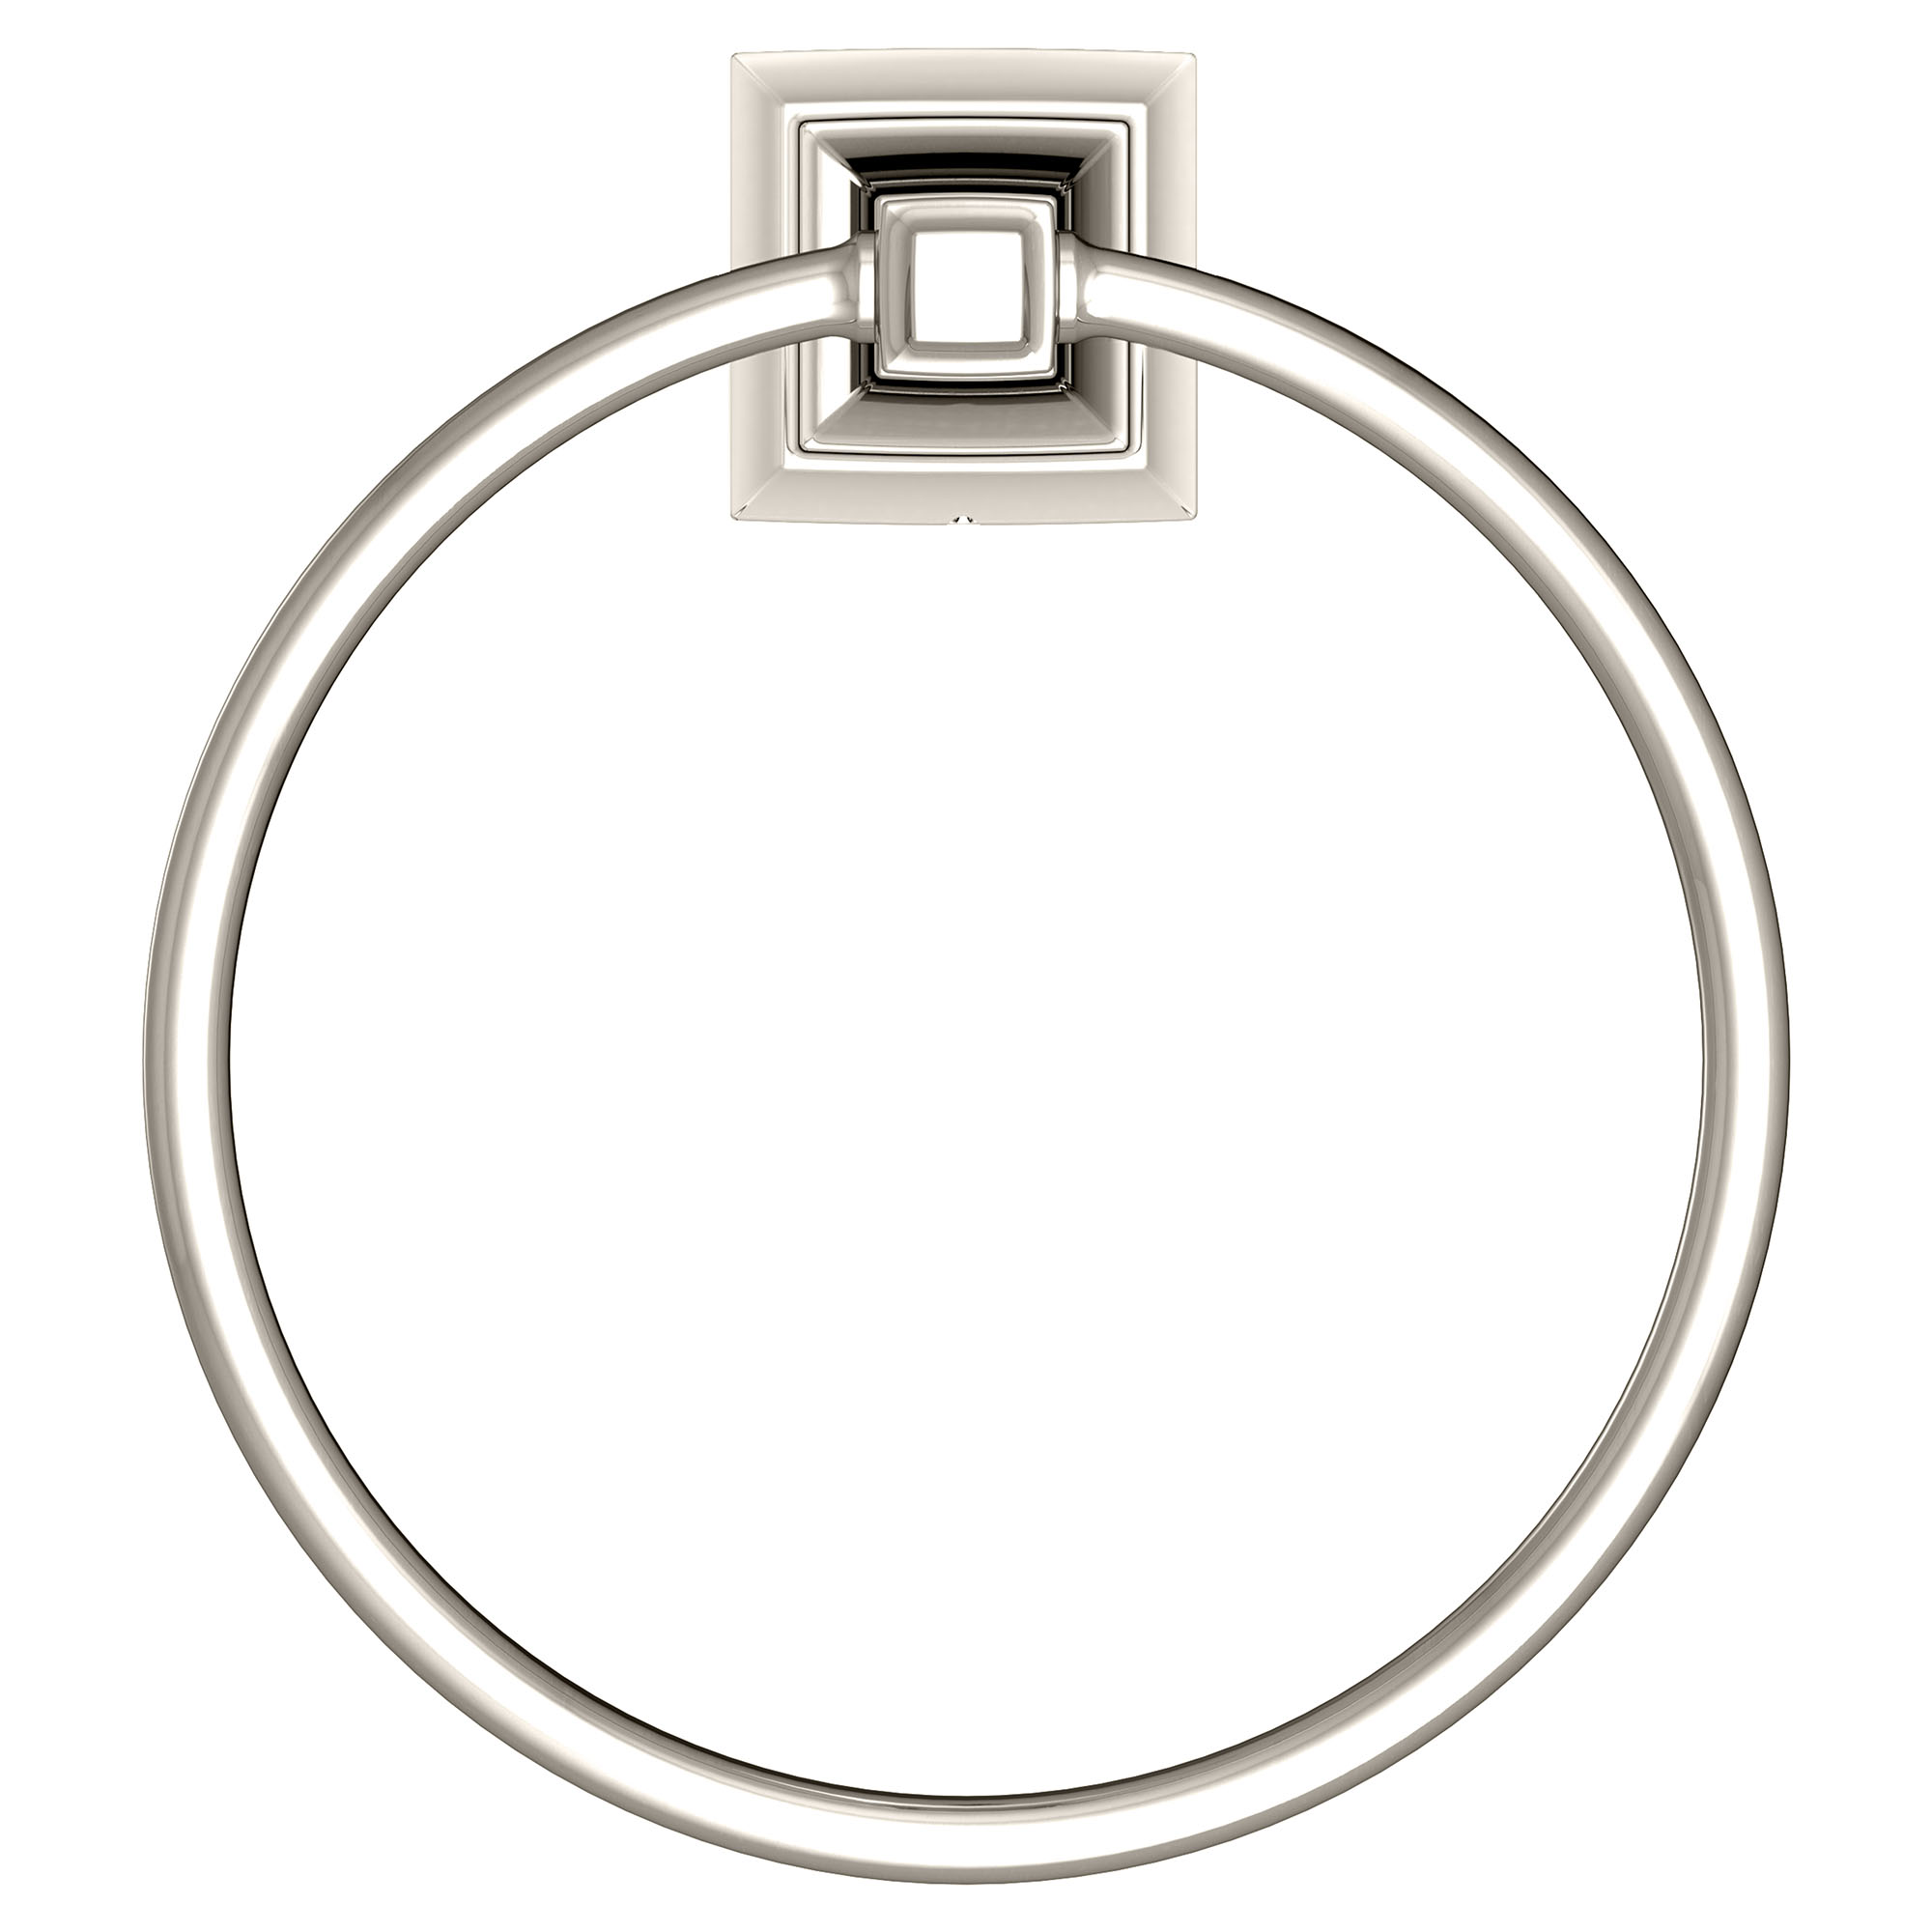 Town Square™ S Towel Ring